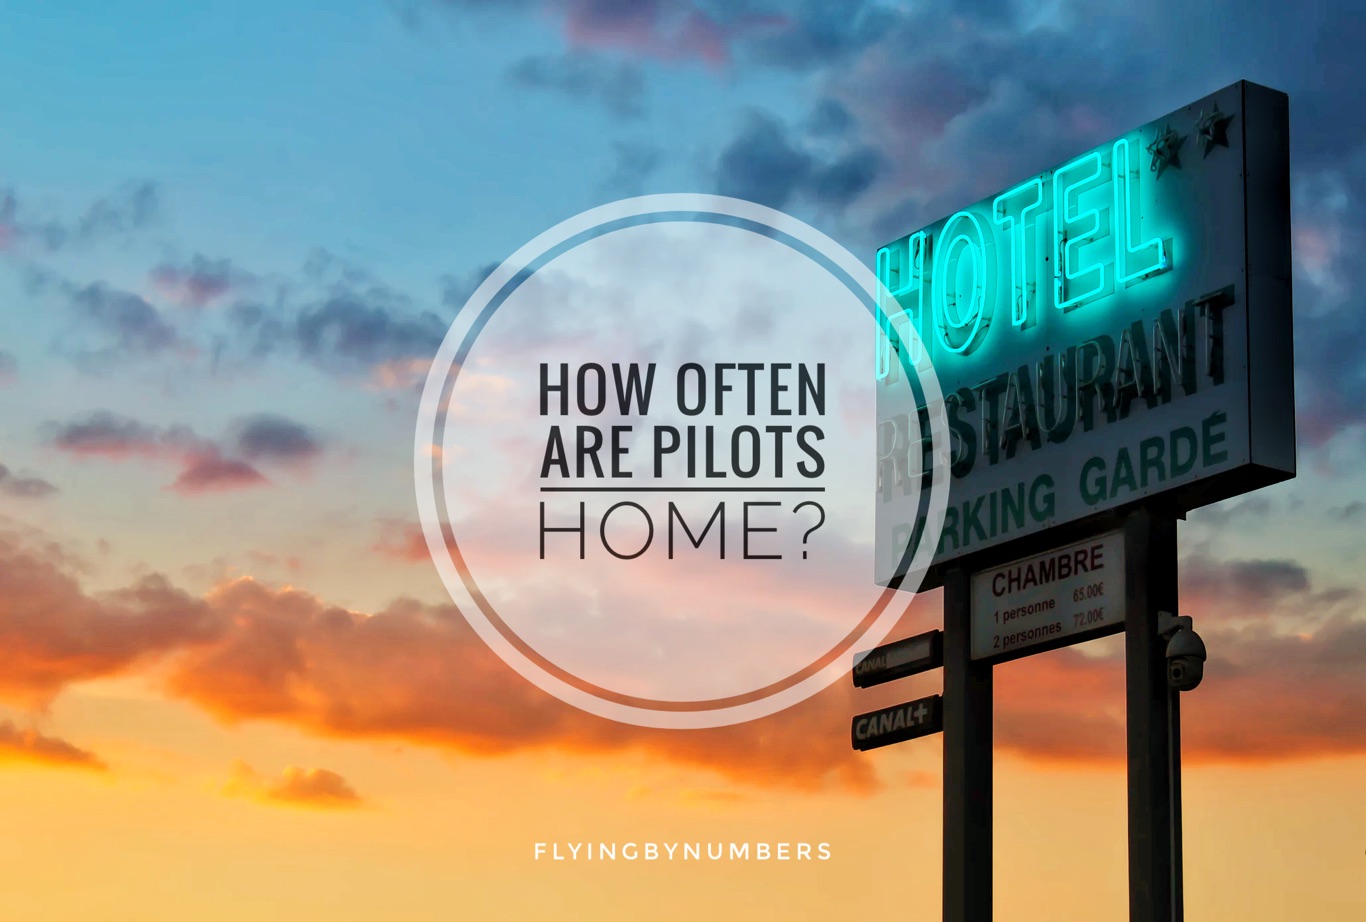 a look at how many nights pilots stay away from home in hotels each week